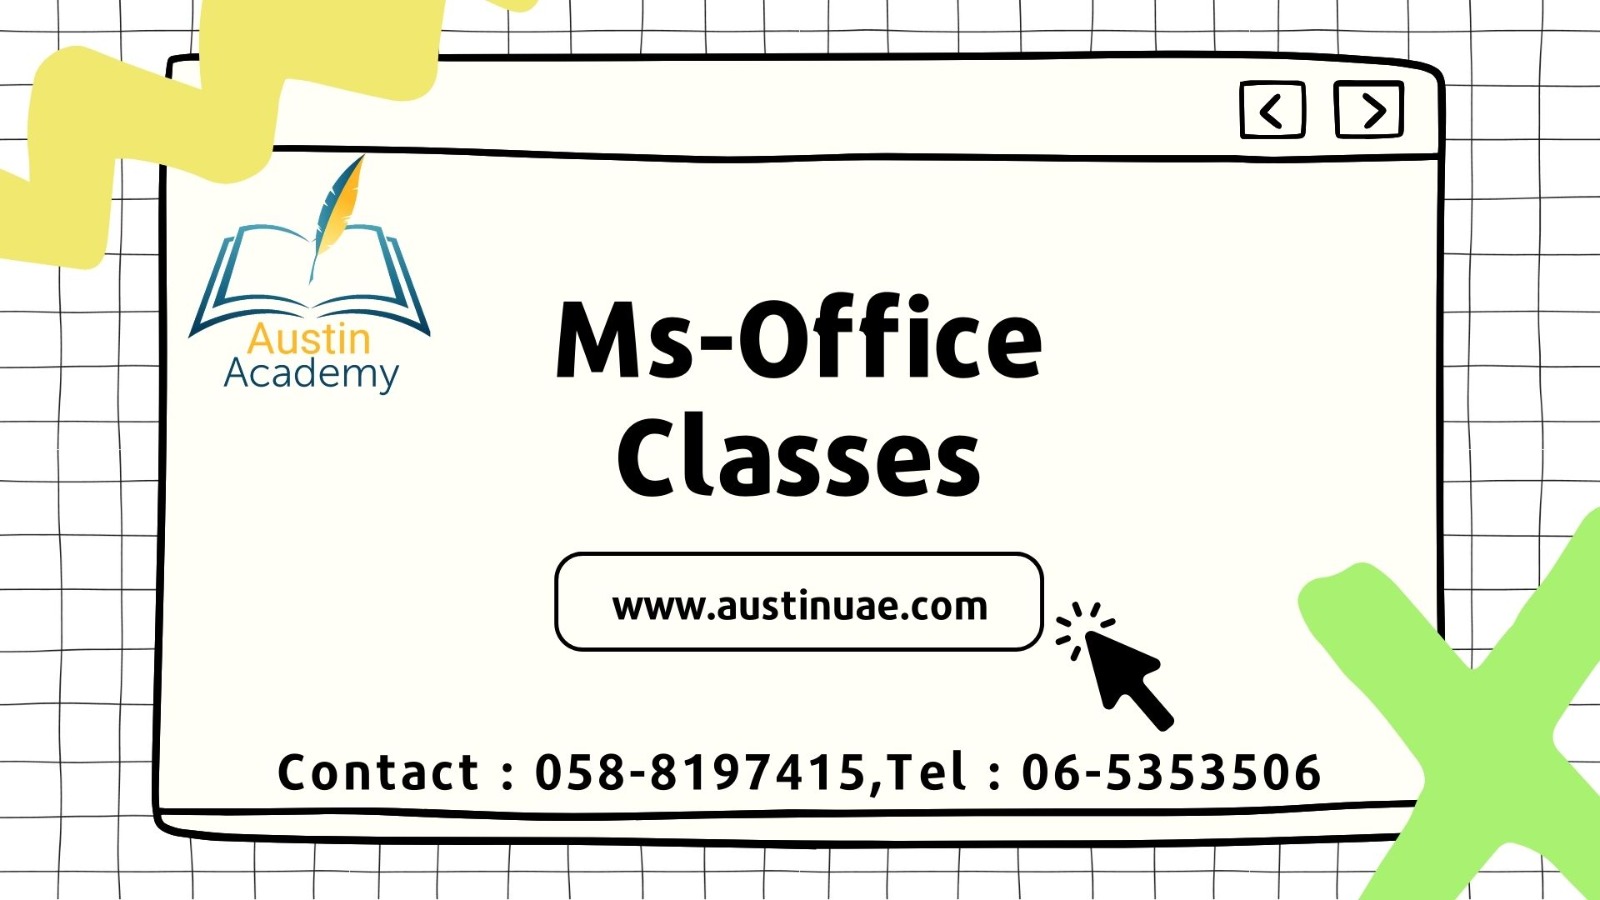 MS-Office Classes in Sharjah @ Austin Academy 0564545906